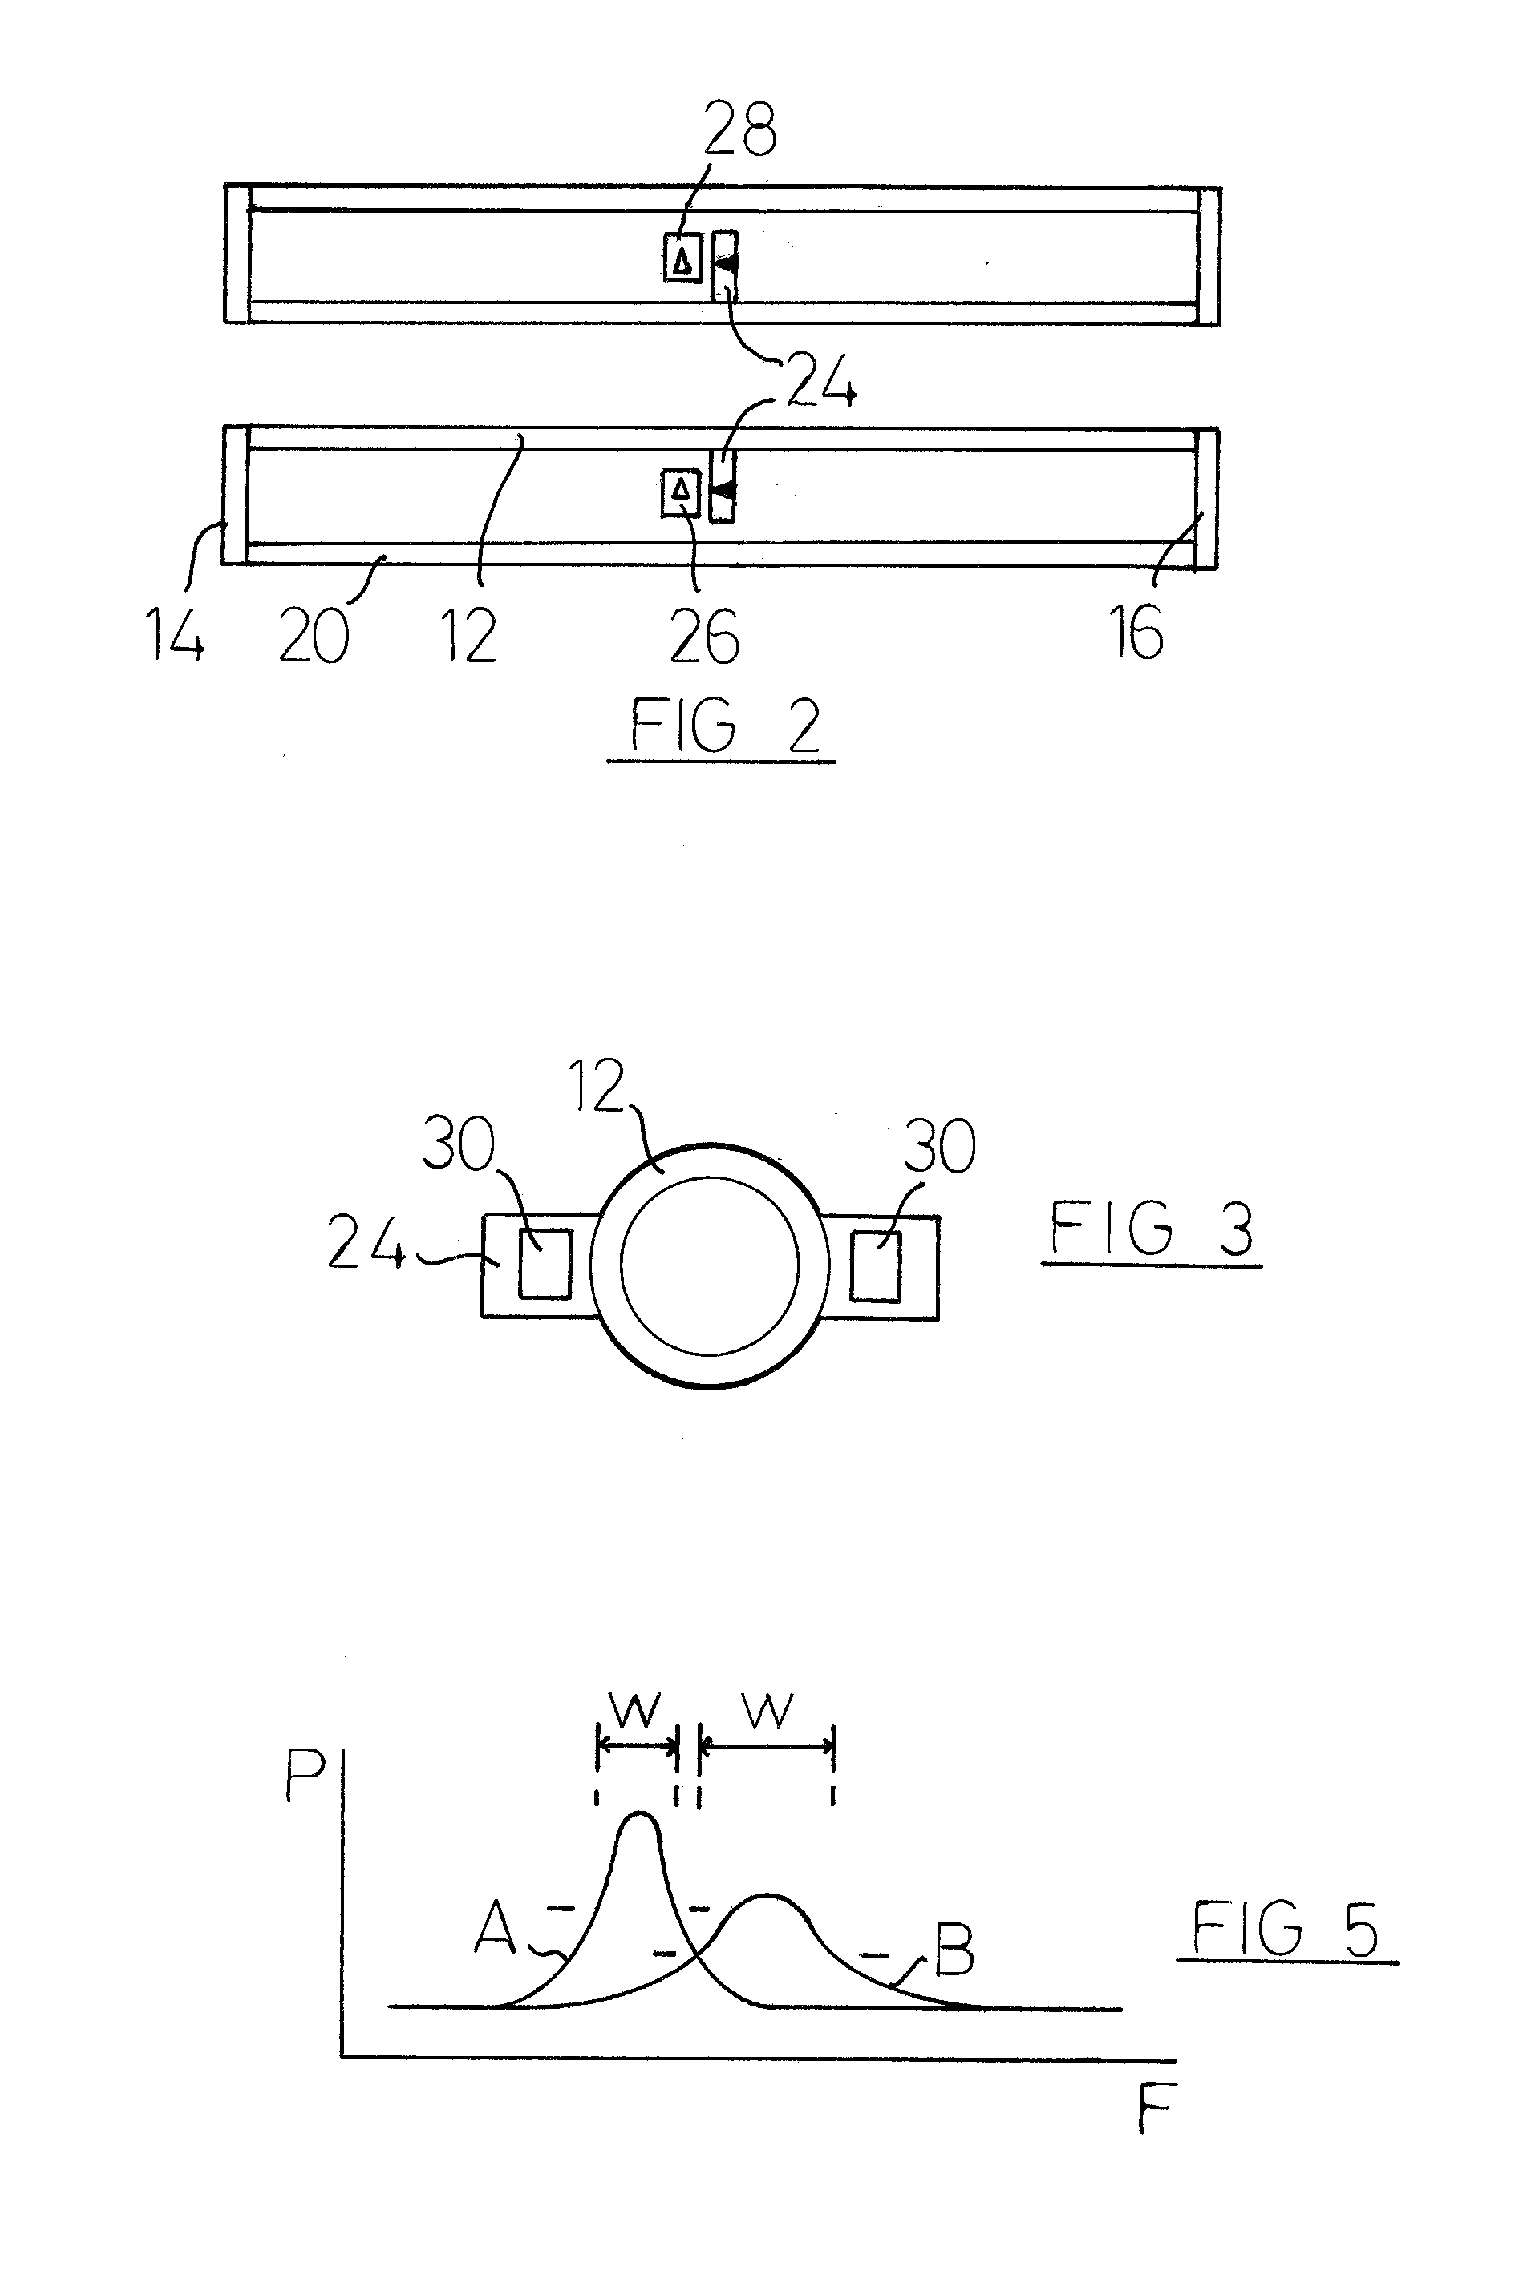 Measurement tool and method of use